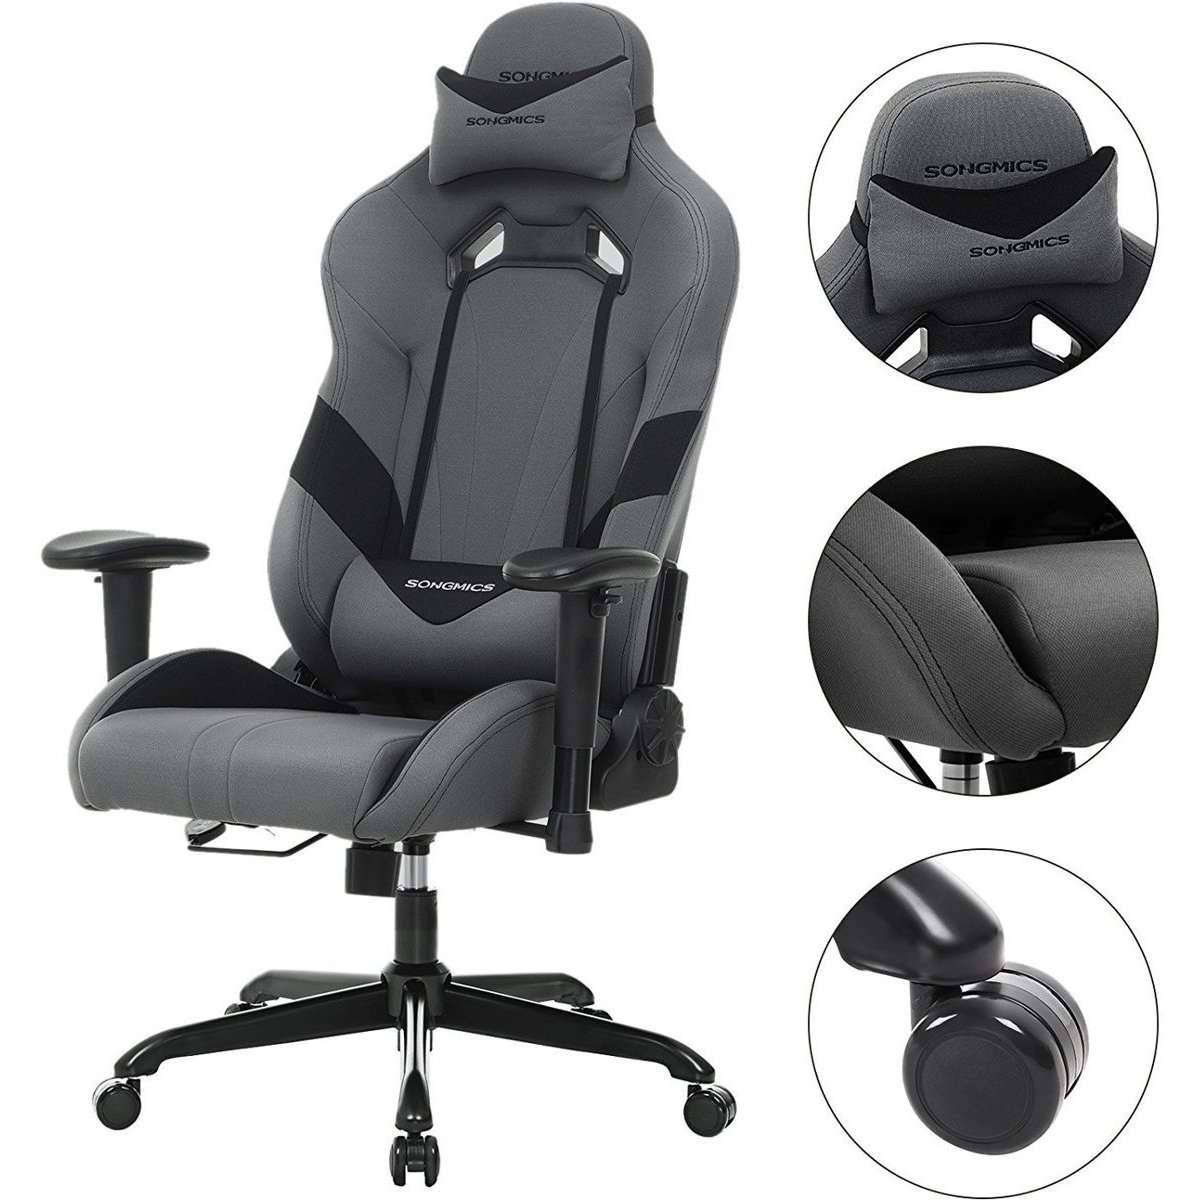 Nancy's Loyola Gaming Chair - Office Chair With Adjustable Armrests - Chair With Pillow - Gaming Chairs